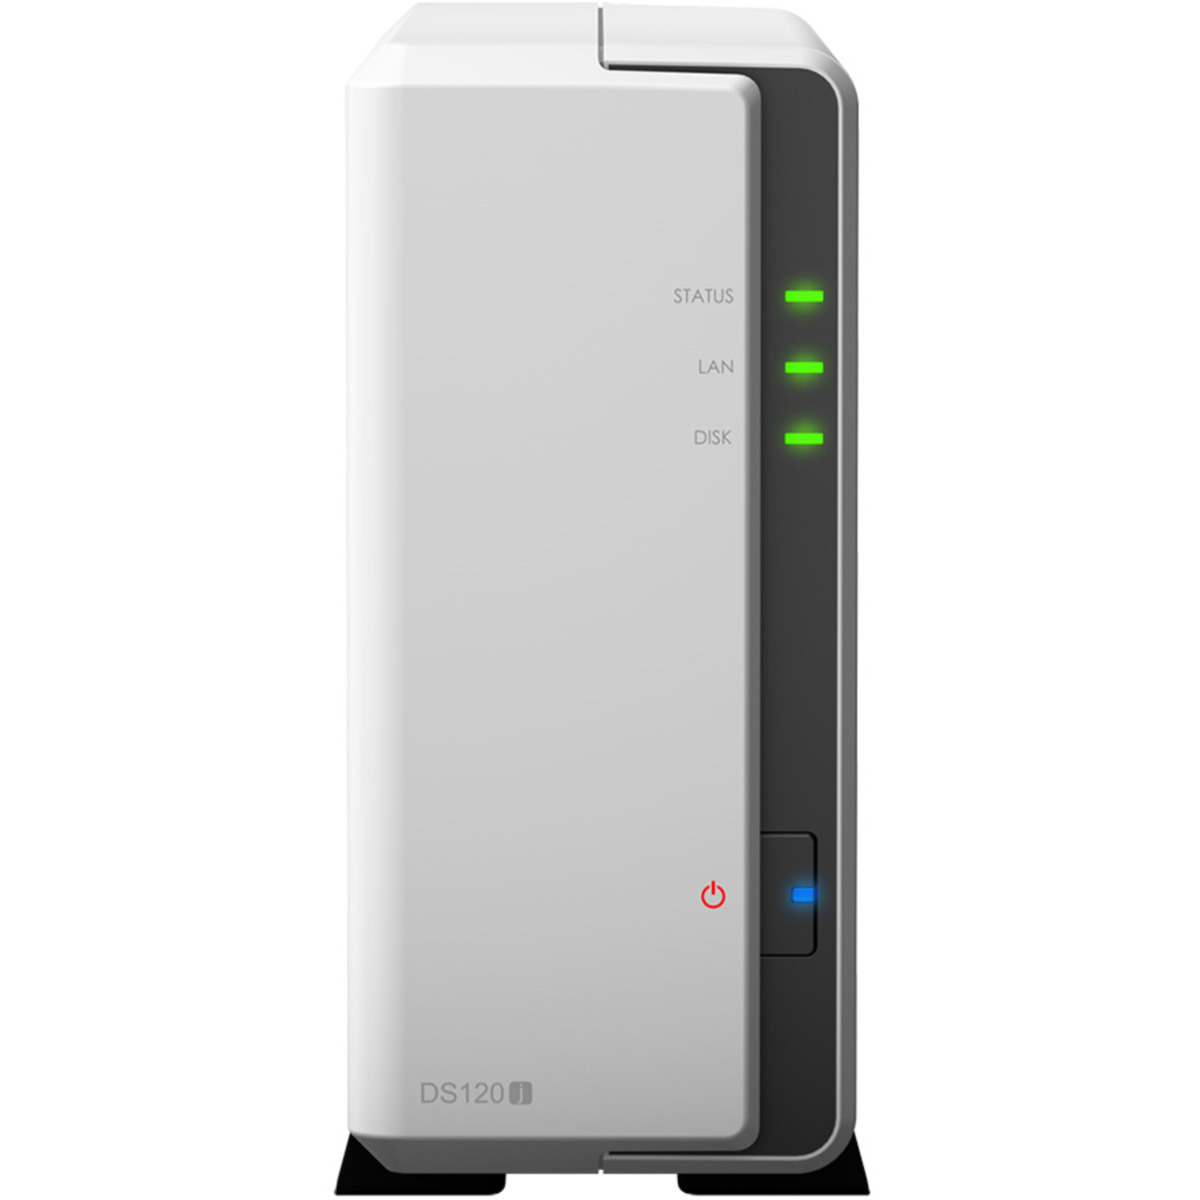 buy $314 Synology DiskStation DS120j 8tb Desktop NAS - Network Attached Storage Device 1x8000gb Seagate BarraCuda ST8000DM004 3.5 5400rpm SATA 6Gb/s HDD CONSUMER Class Drives Installed - Burn-In Tested - nas headquarters buy network attached storage server device das new raid-5 free shipping usa christmas new year holiday sale DiskStation DS120j